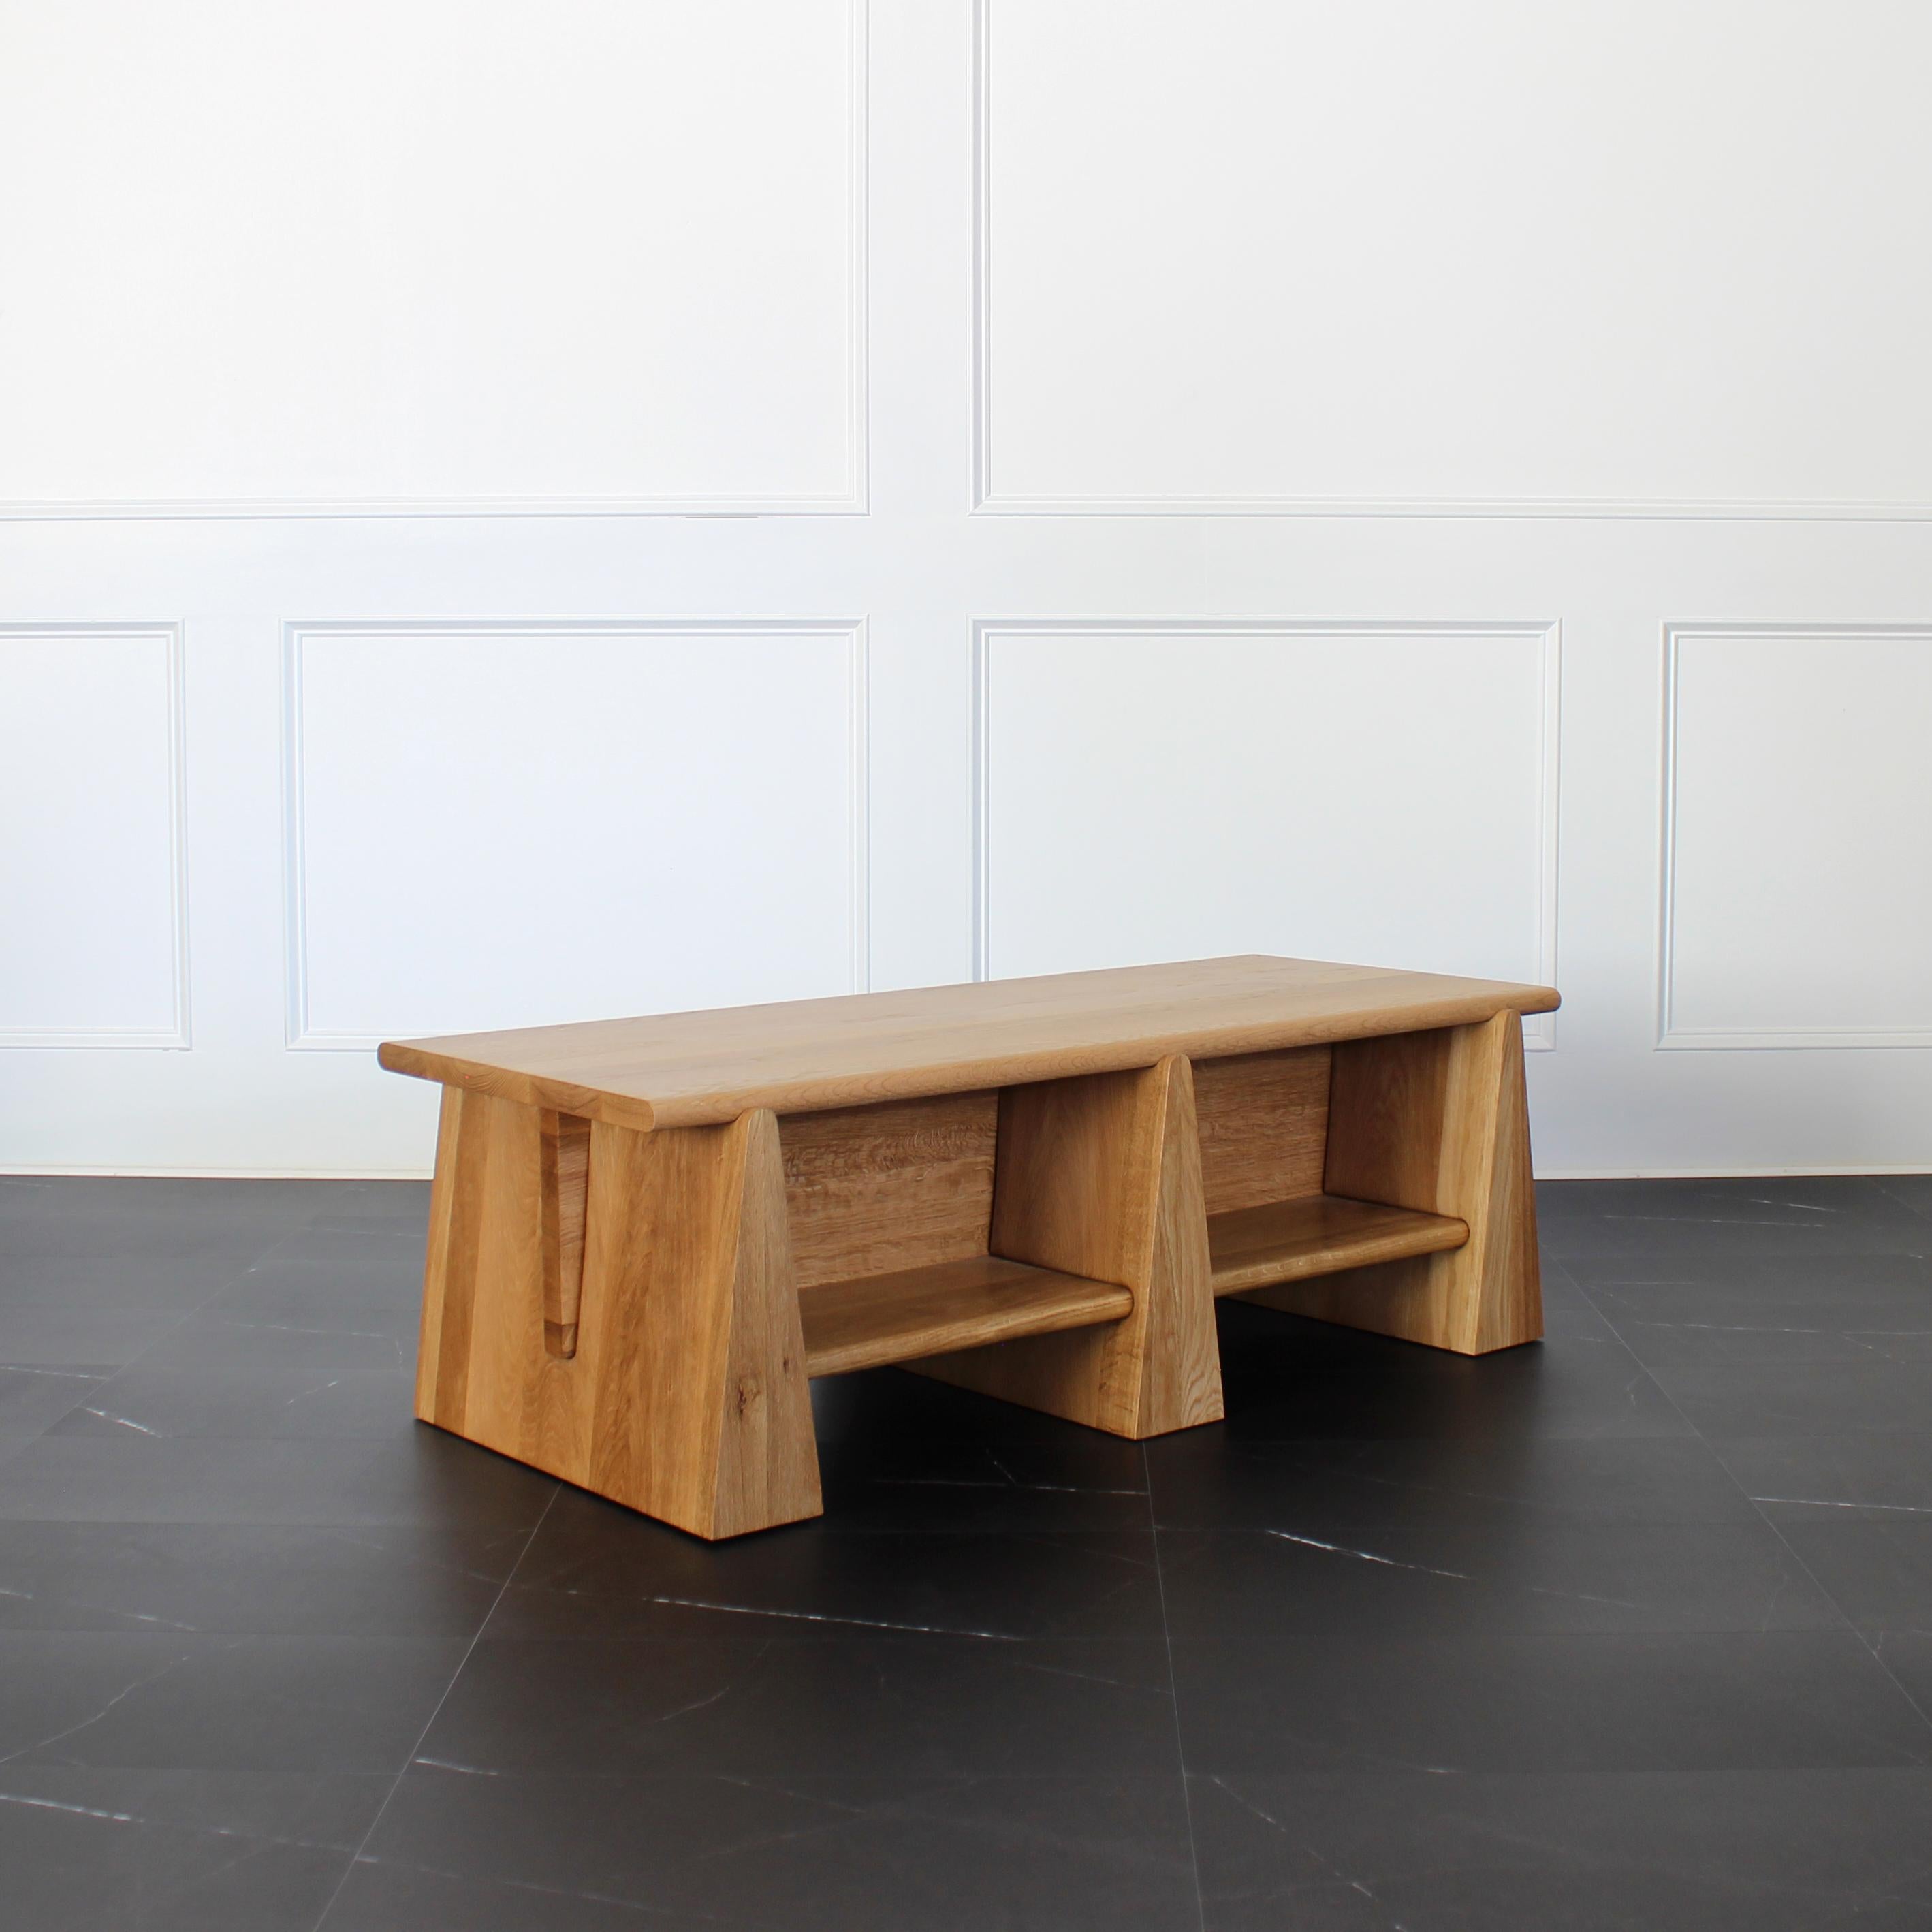 Tabei Coffee Table by Crump and Kwash 

Features a solid wood frame and table top with a durable acrylic sealer. 

Available in - White Oak, Walnut, Blackened Oak, and Maple. 

Customizations available.